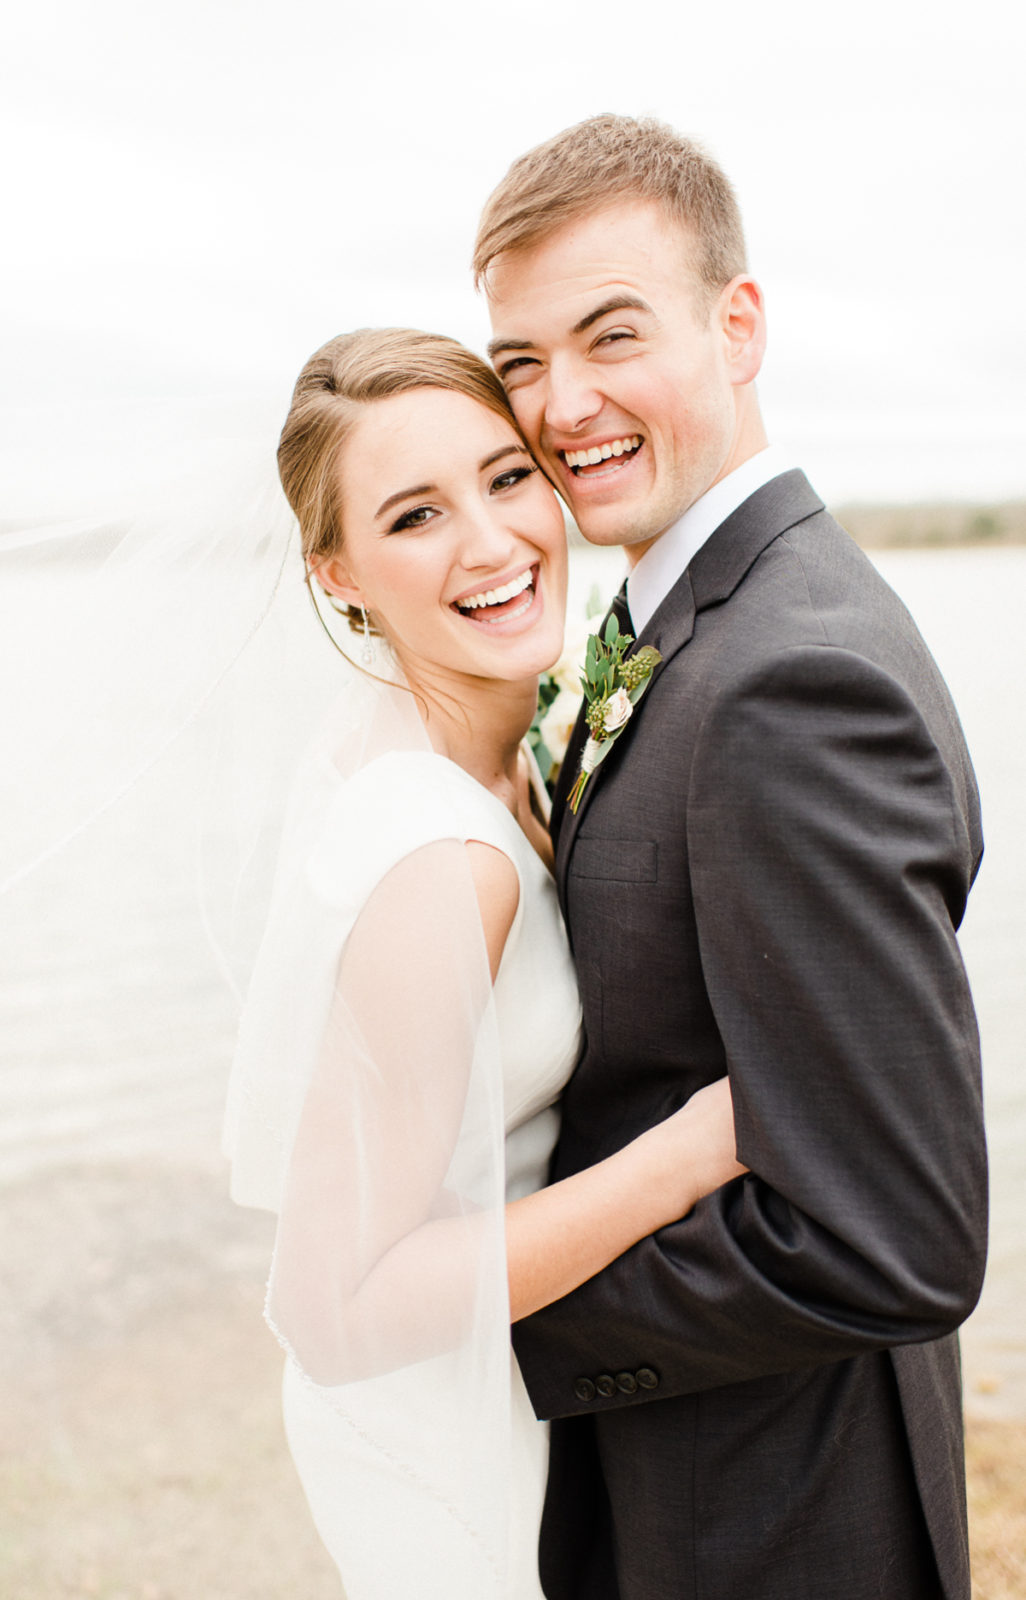 The Boathouse at Millican Reserve Wedding Reception | Madelyn + Conner ...